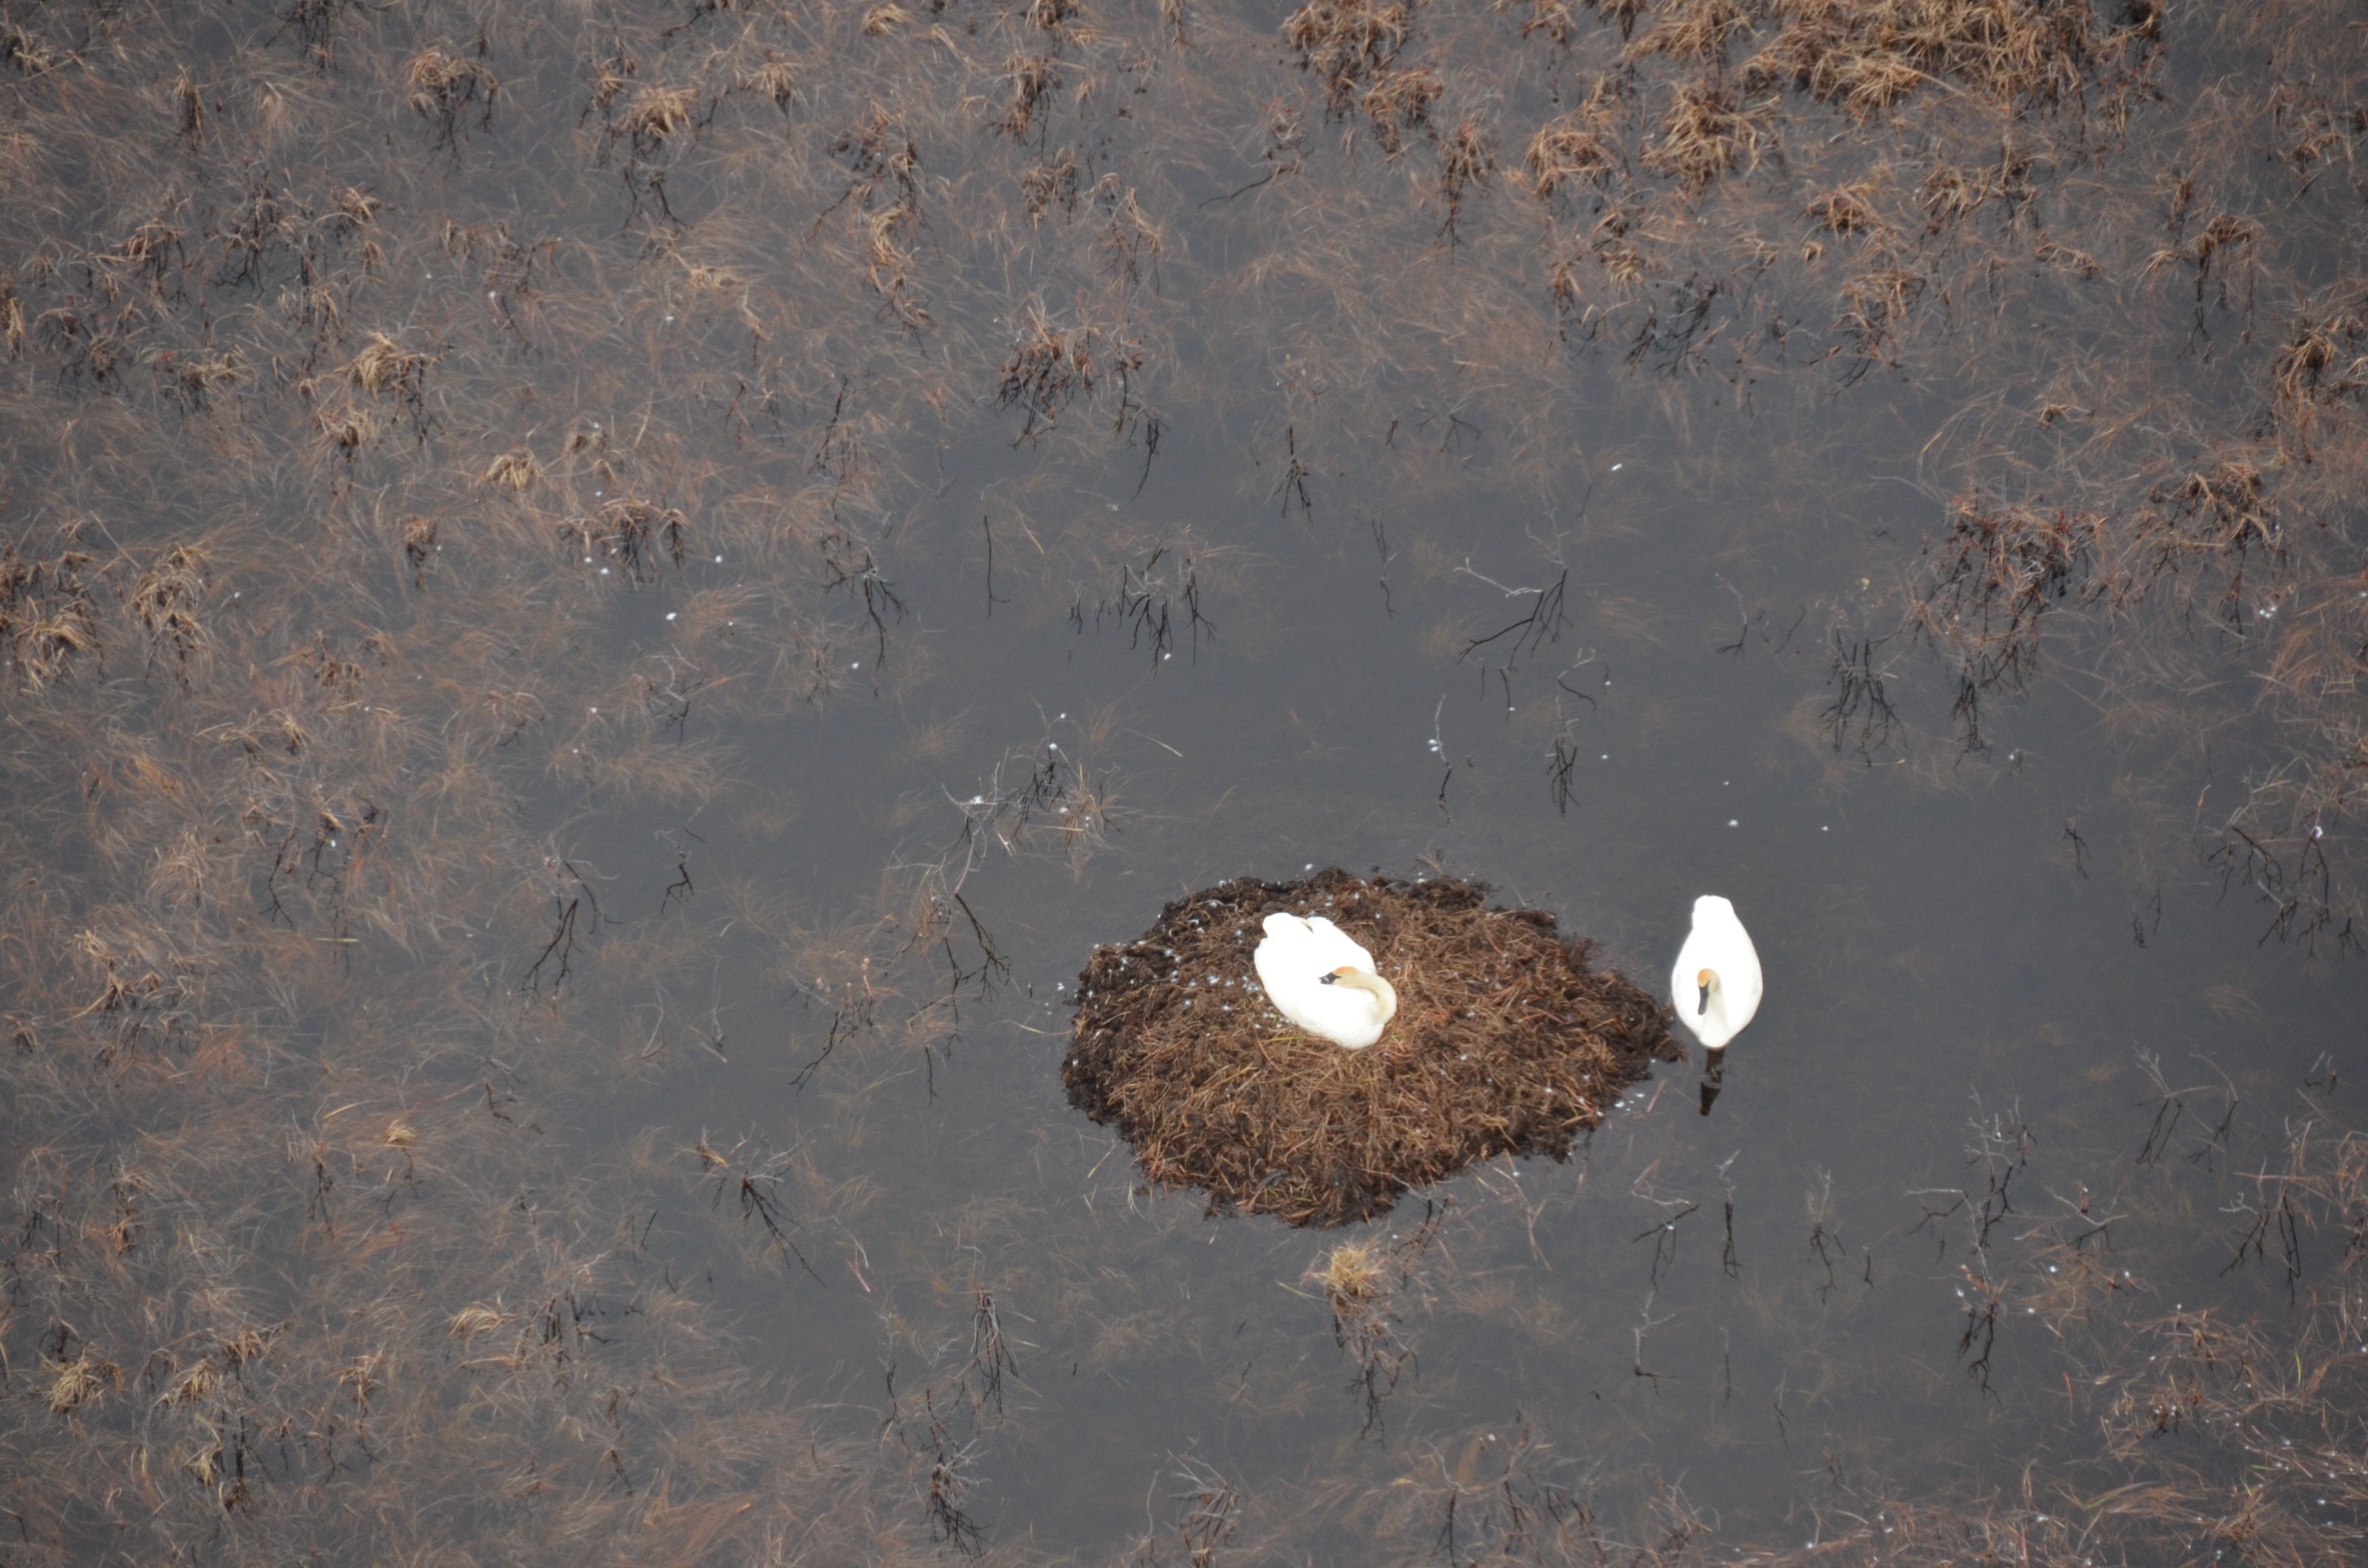 A pair of tundra swans nesting in a pond. Photo by NPS/D. Vinson.